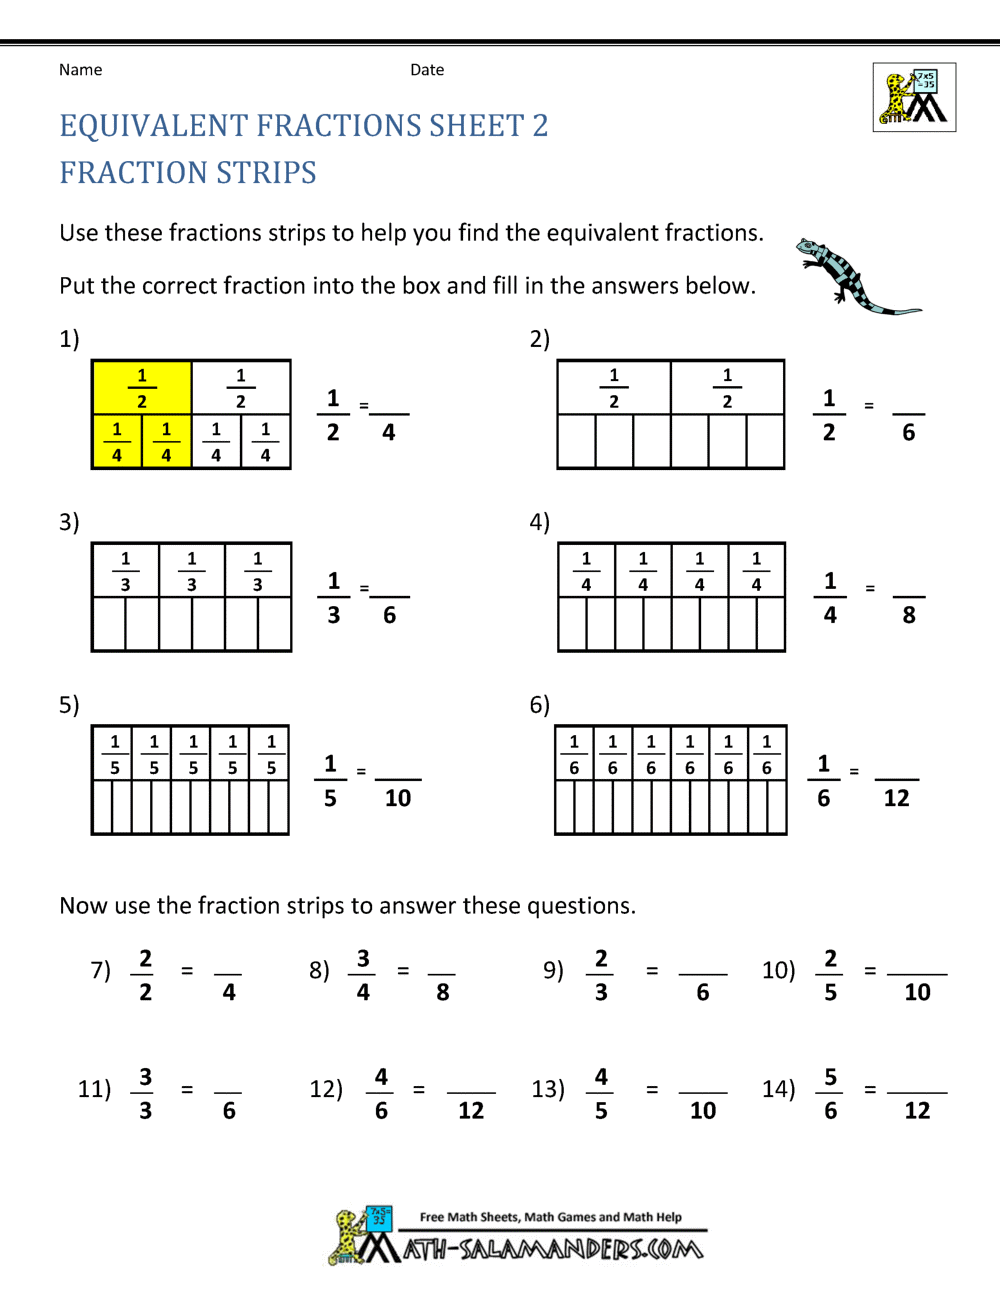 teaching-equivalent-fractions-grade-5-equivalent-fractions-simplifying-fractions-worksheets